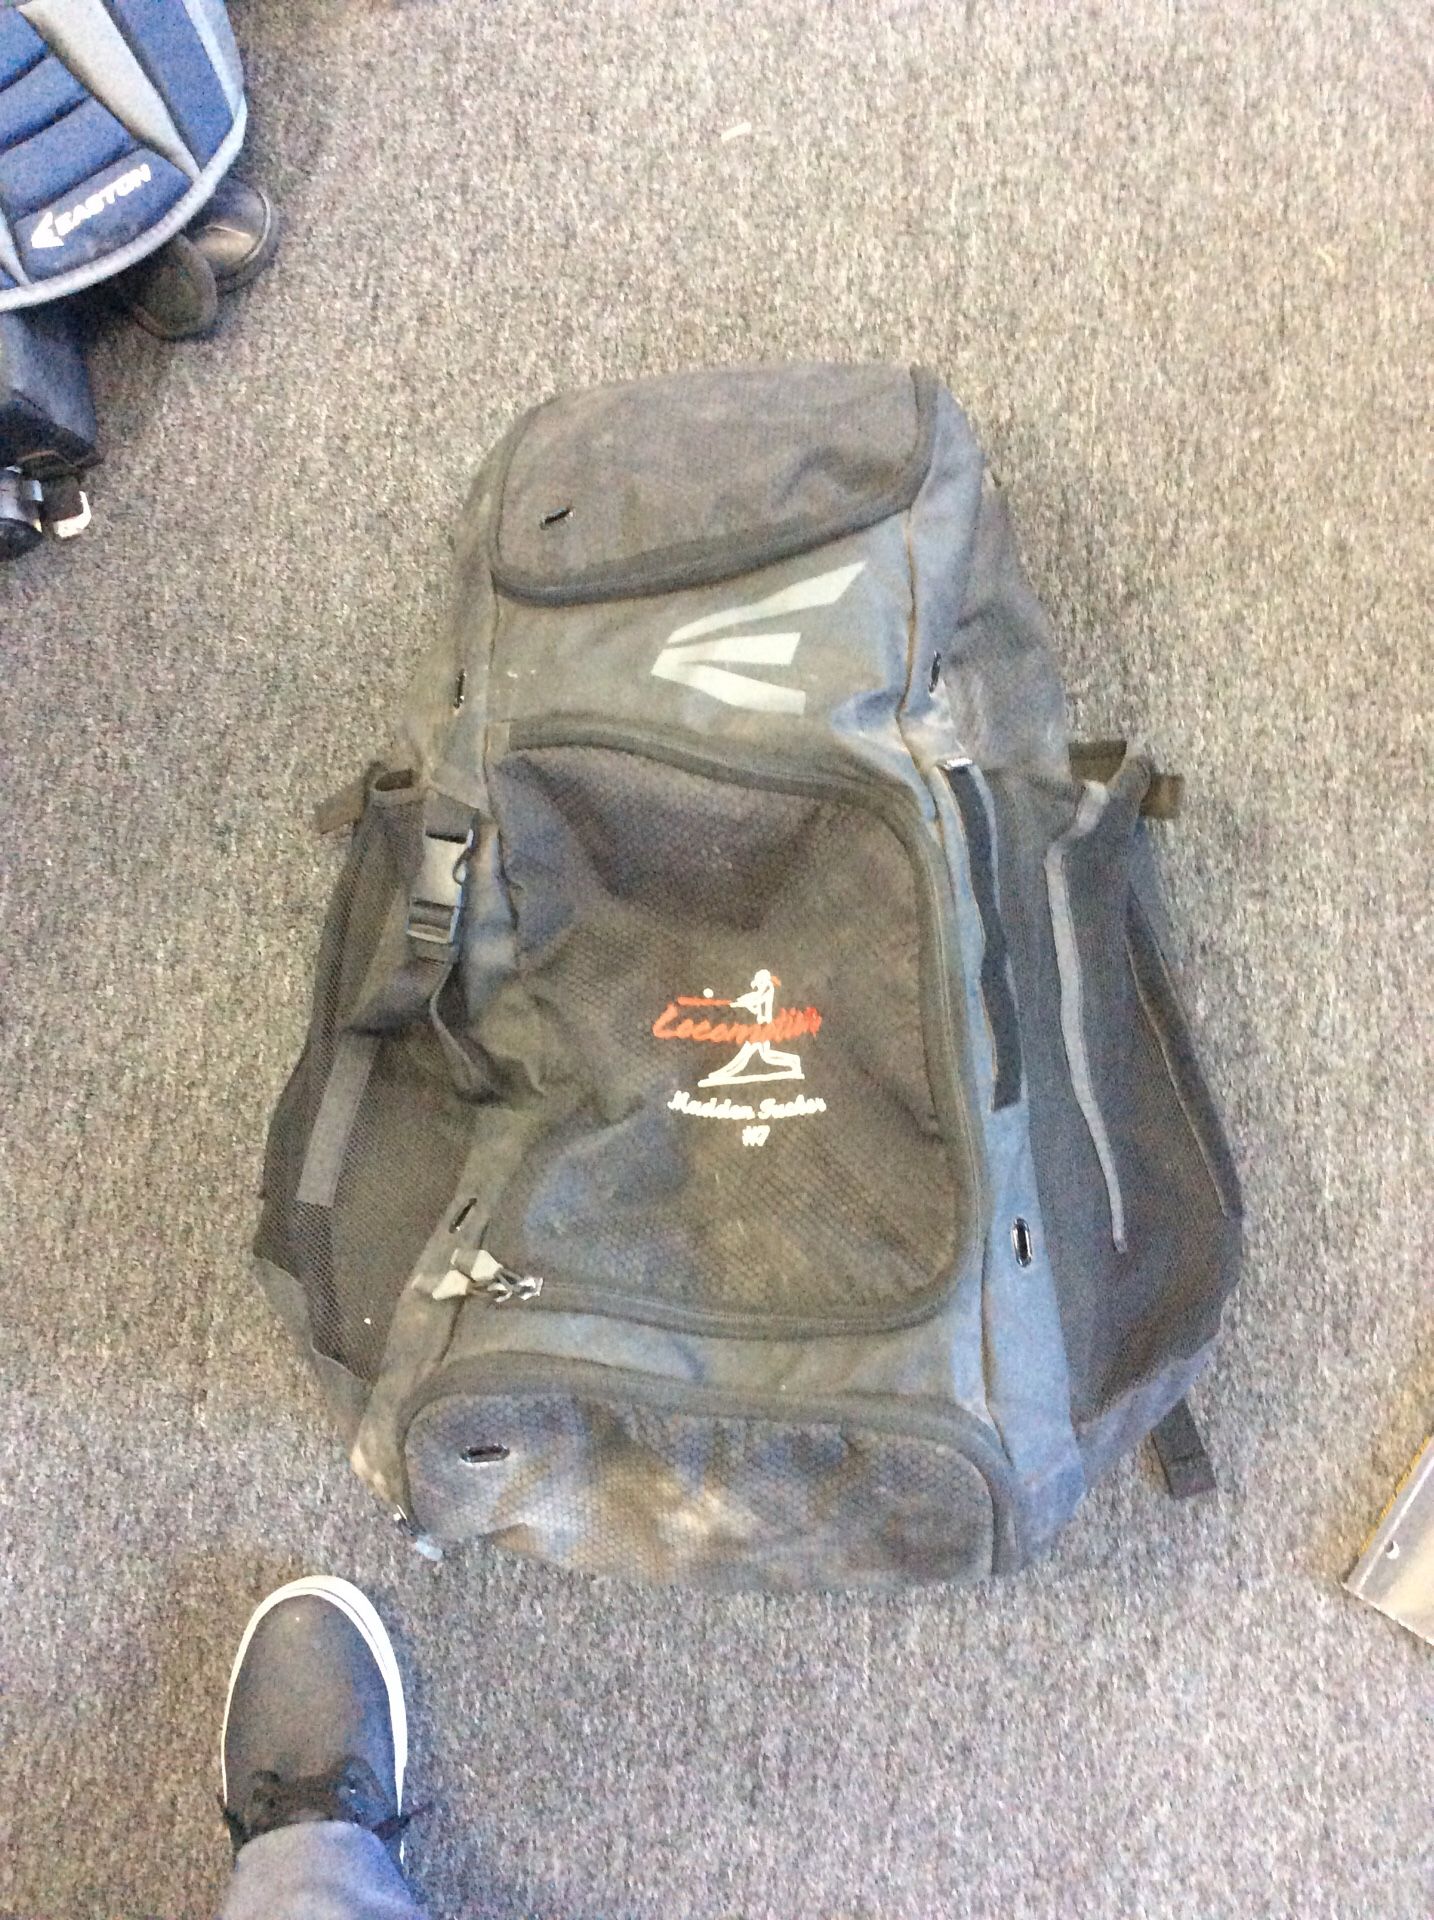 Easton Catchers Backpack As Is - Pick up only